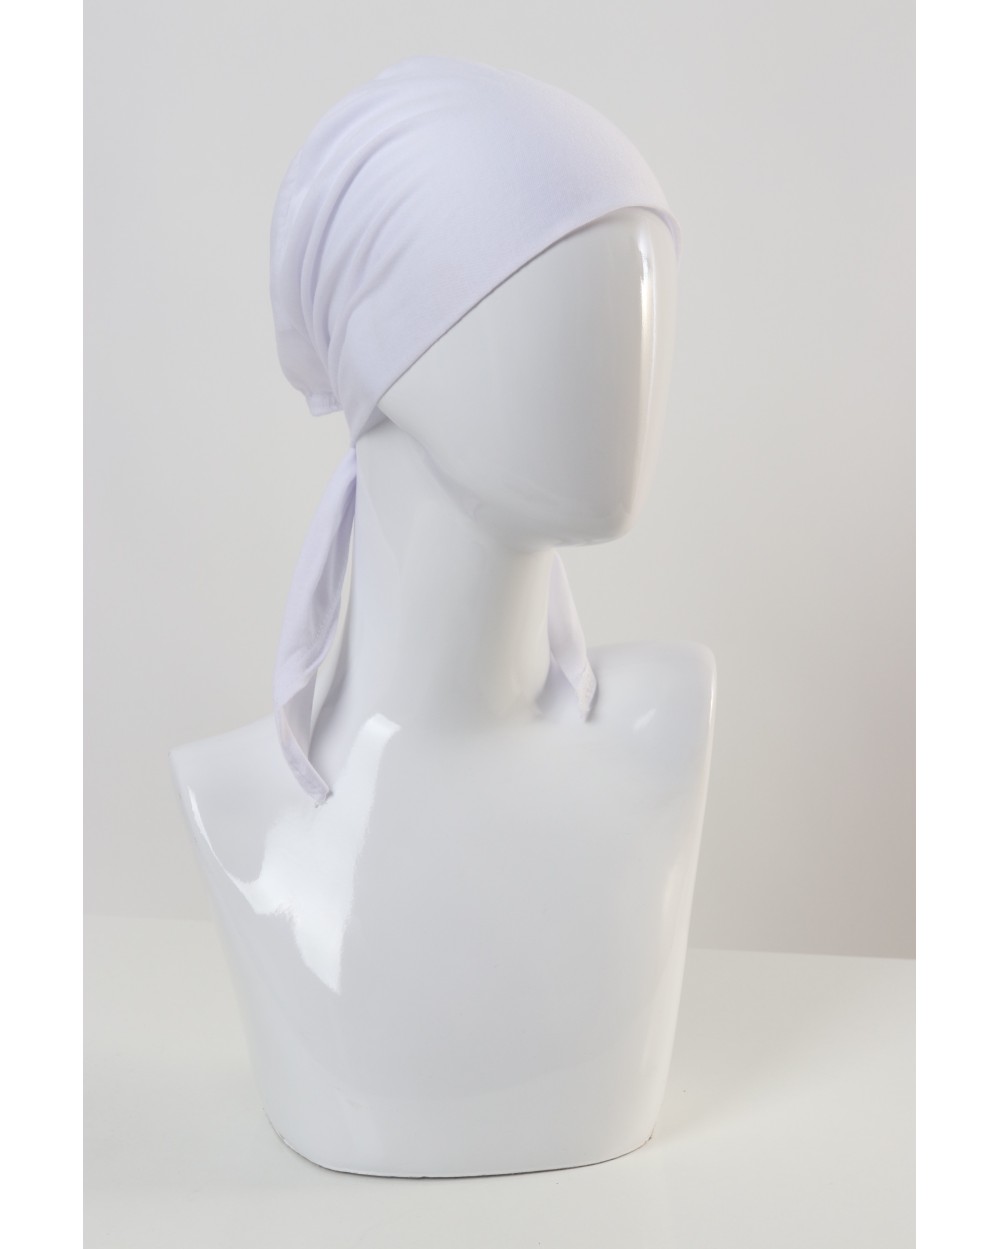 Cotton cap that attaches for hijab